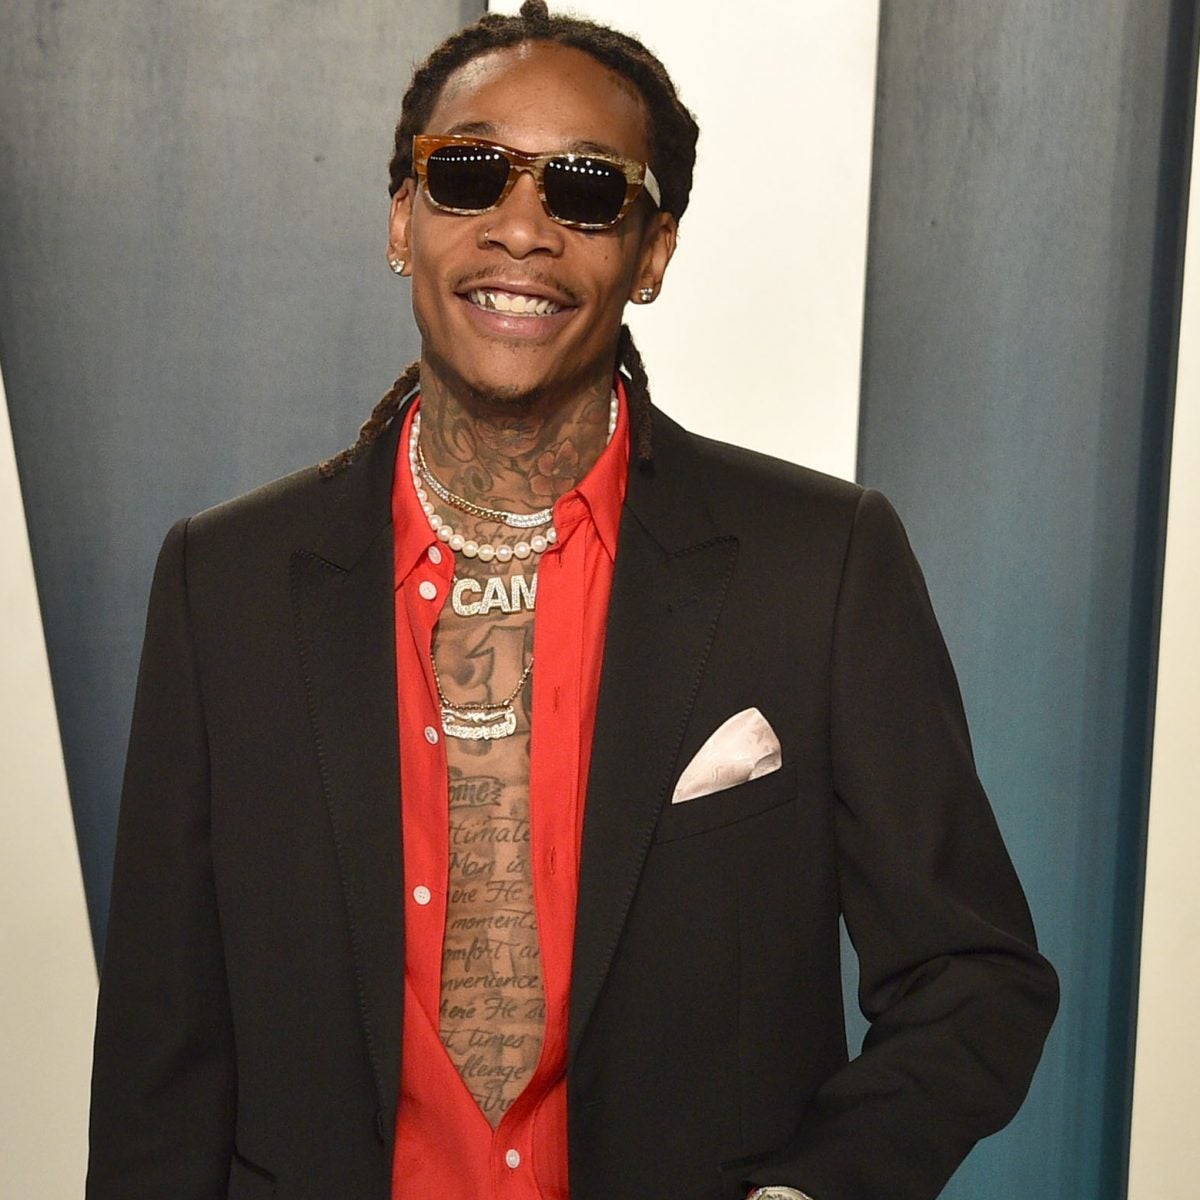 Shop From Wiz Khalifa's Personal Collection Of Clothing